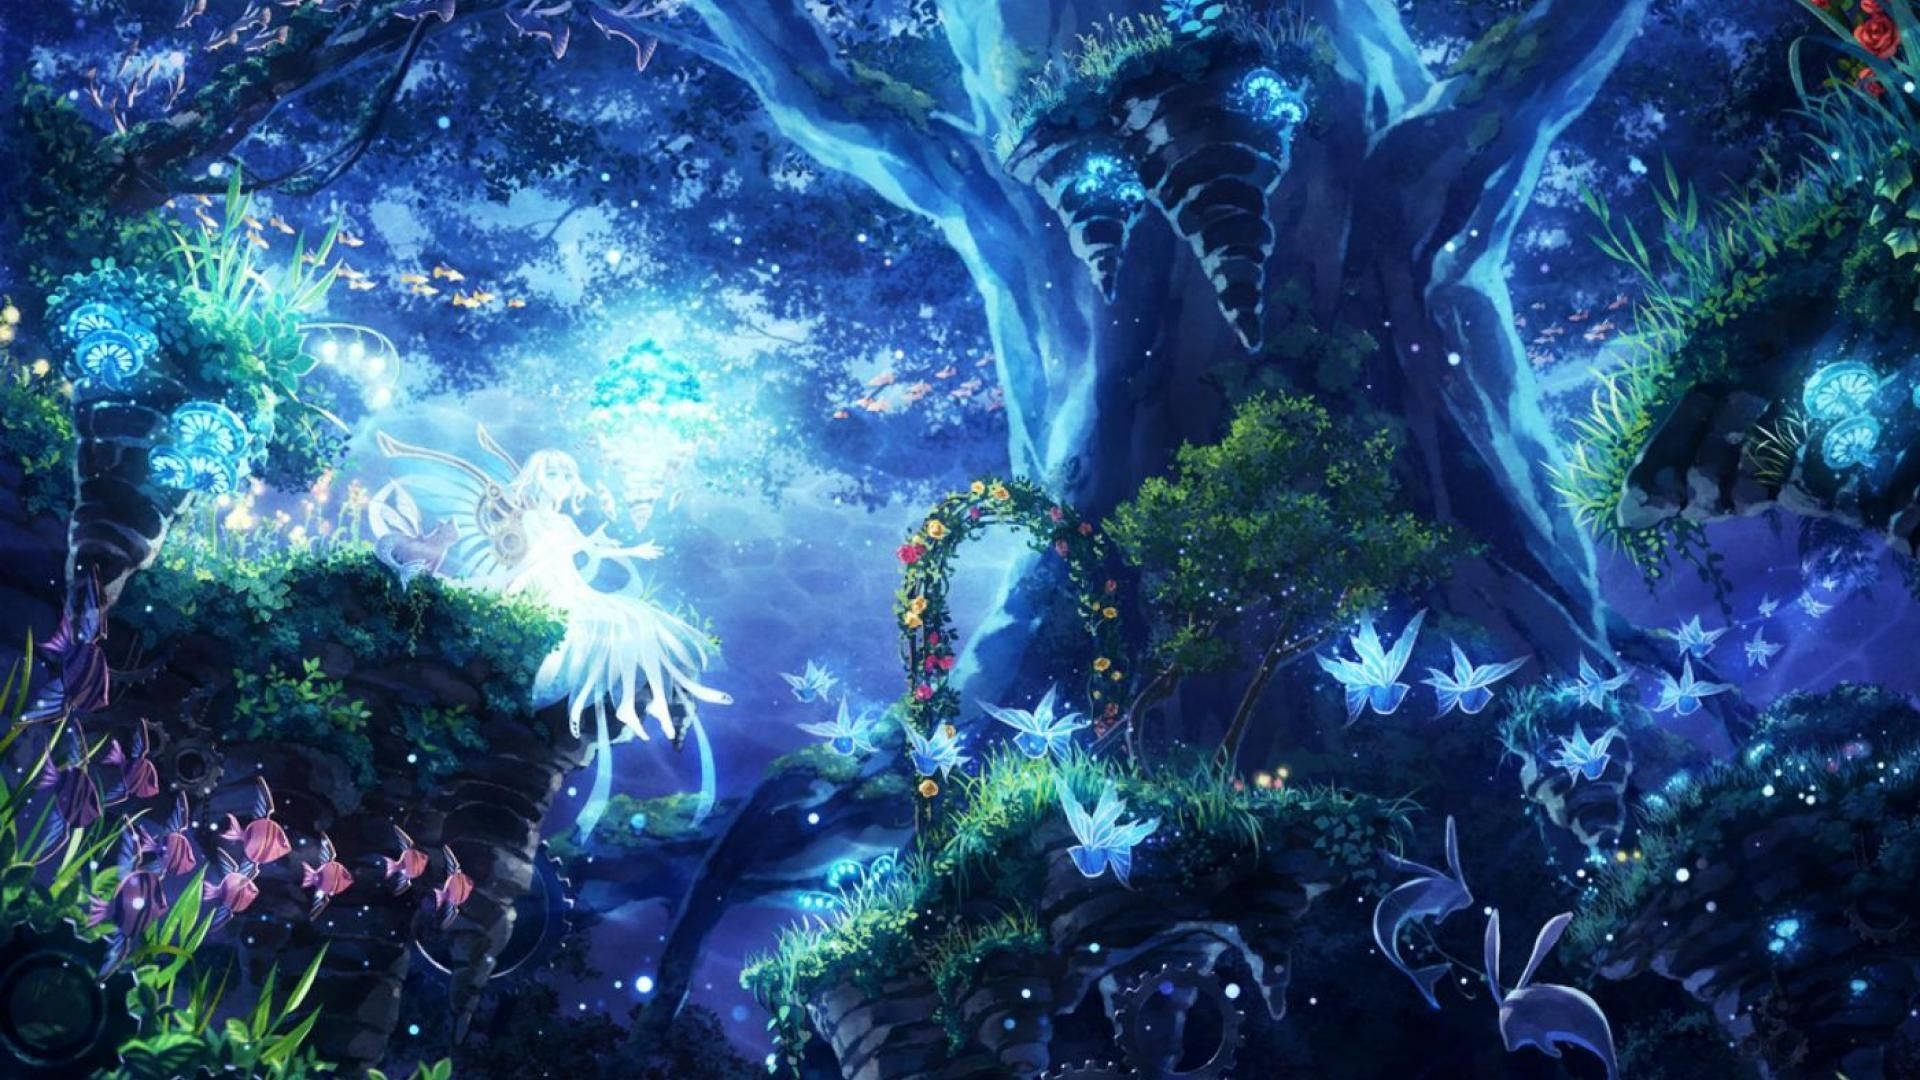 Tale Of The Creation Fairy World Wallpaper